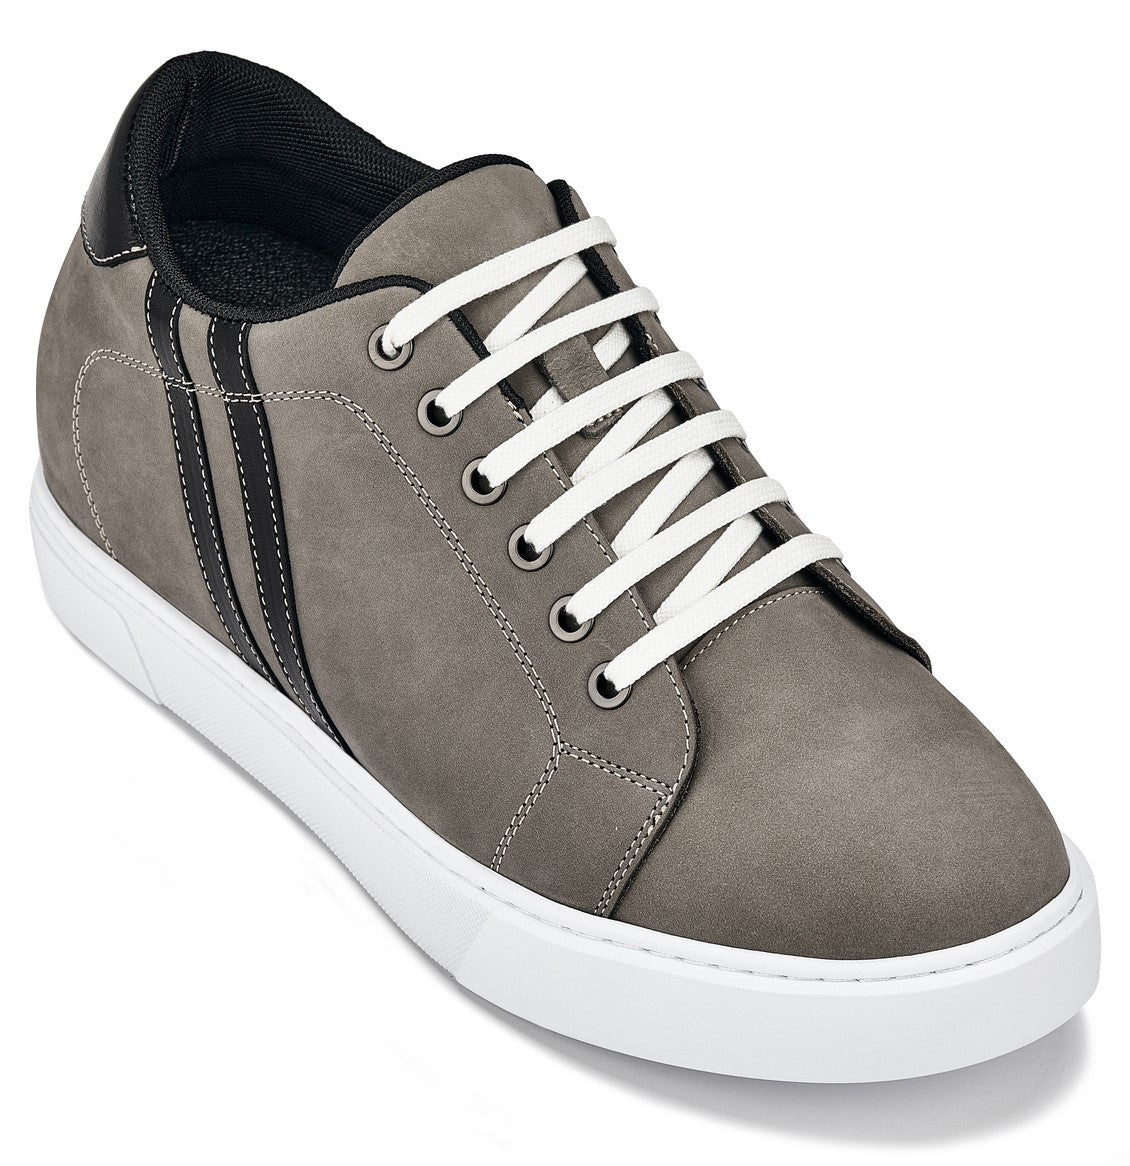 CALTO - K1550 - 2.8 Inches Taller (Nubuck Grey) - Lace Up Casual Sneakers